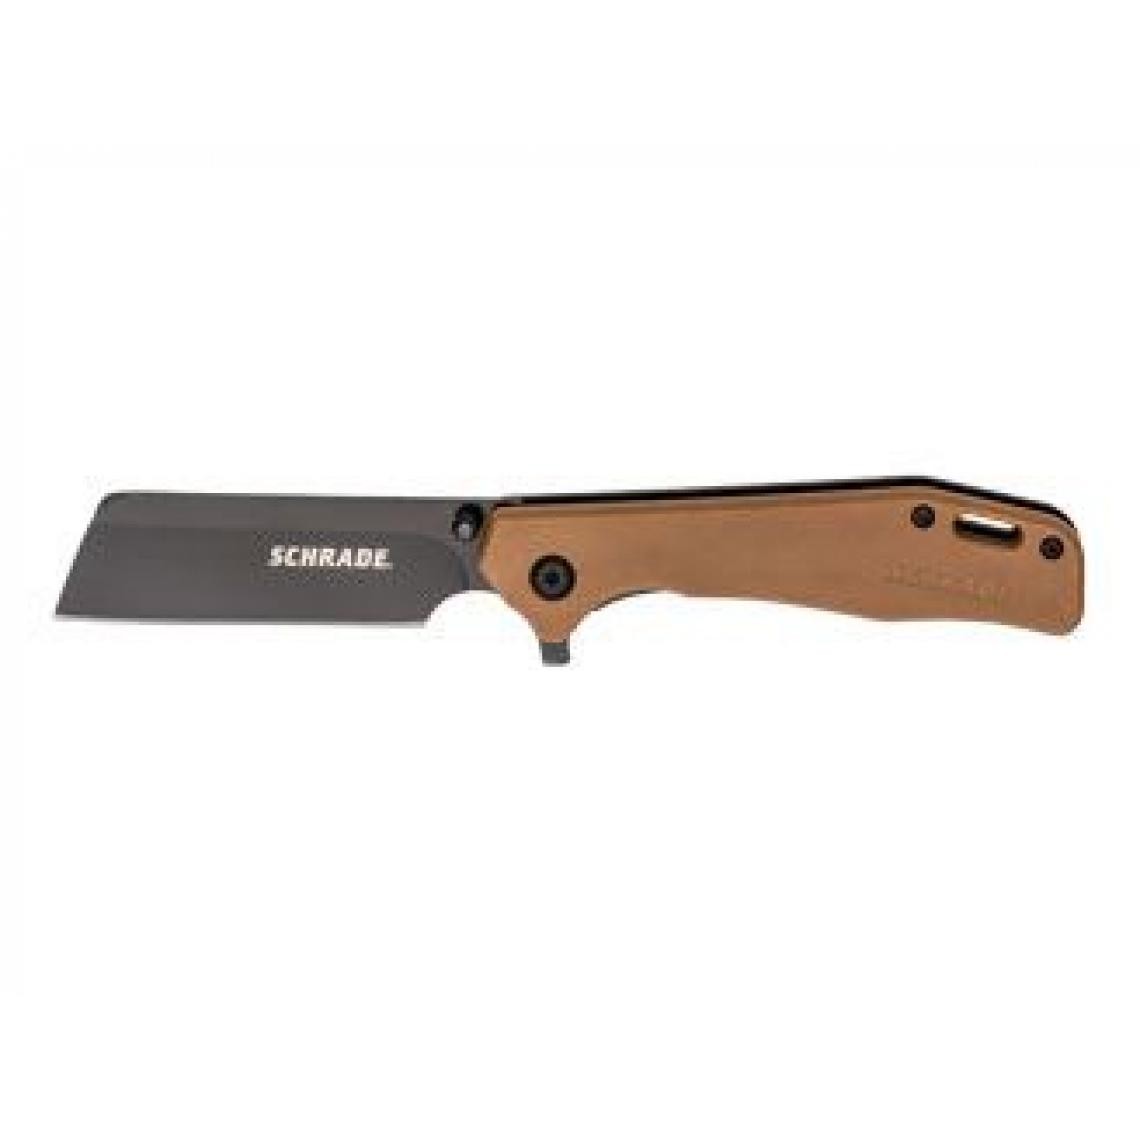 Divers Marques - Schrade FOLDING 3.25 ULTRA GLIDE CLEAVER 1124290 - Outils de coupe